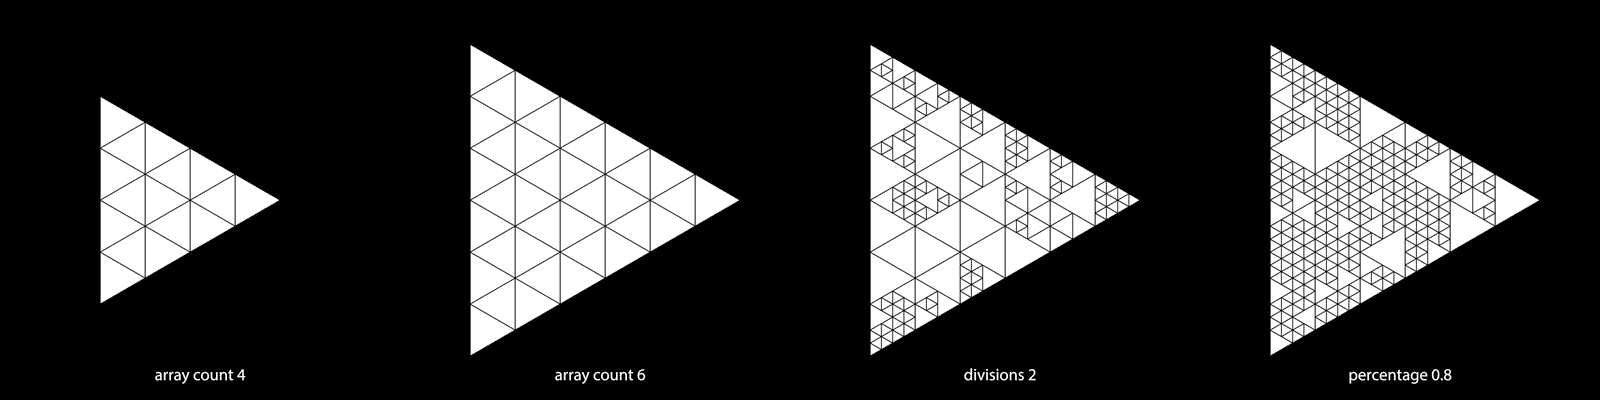 examples of settings for the triangular array